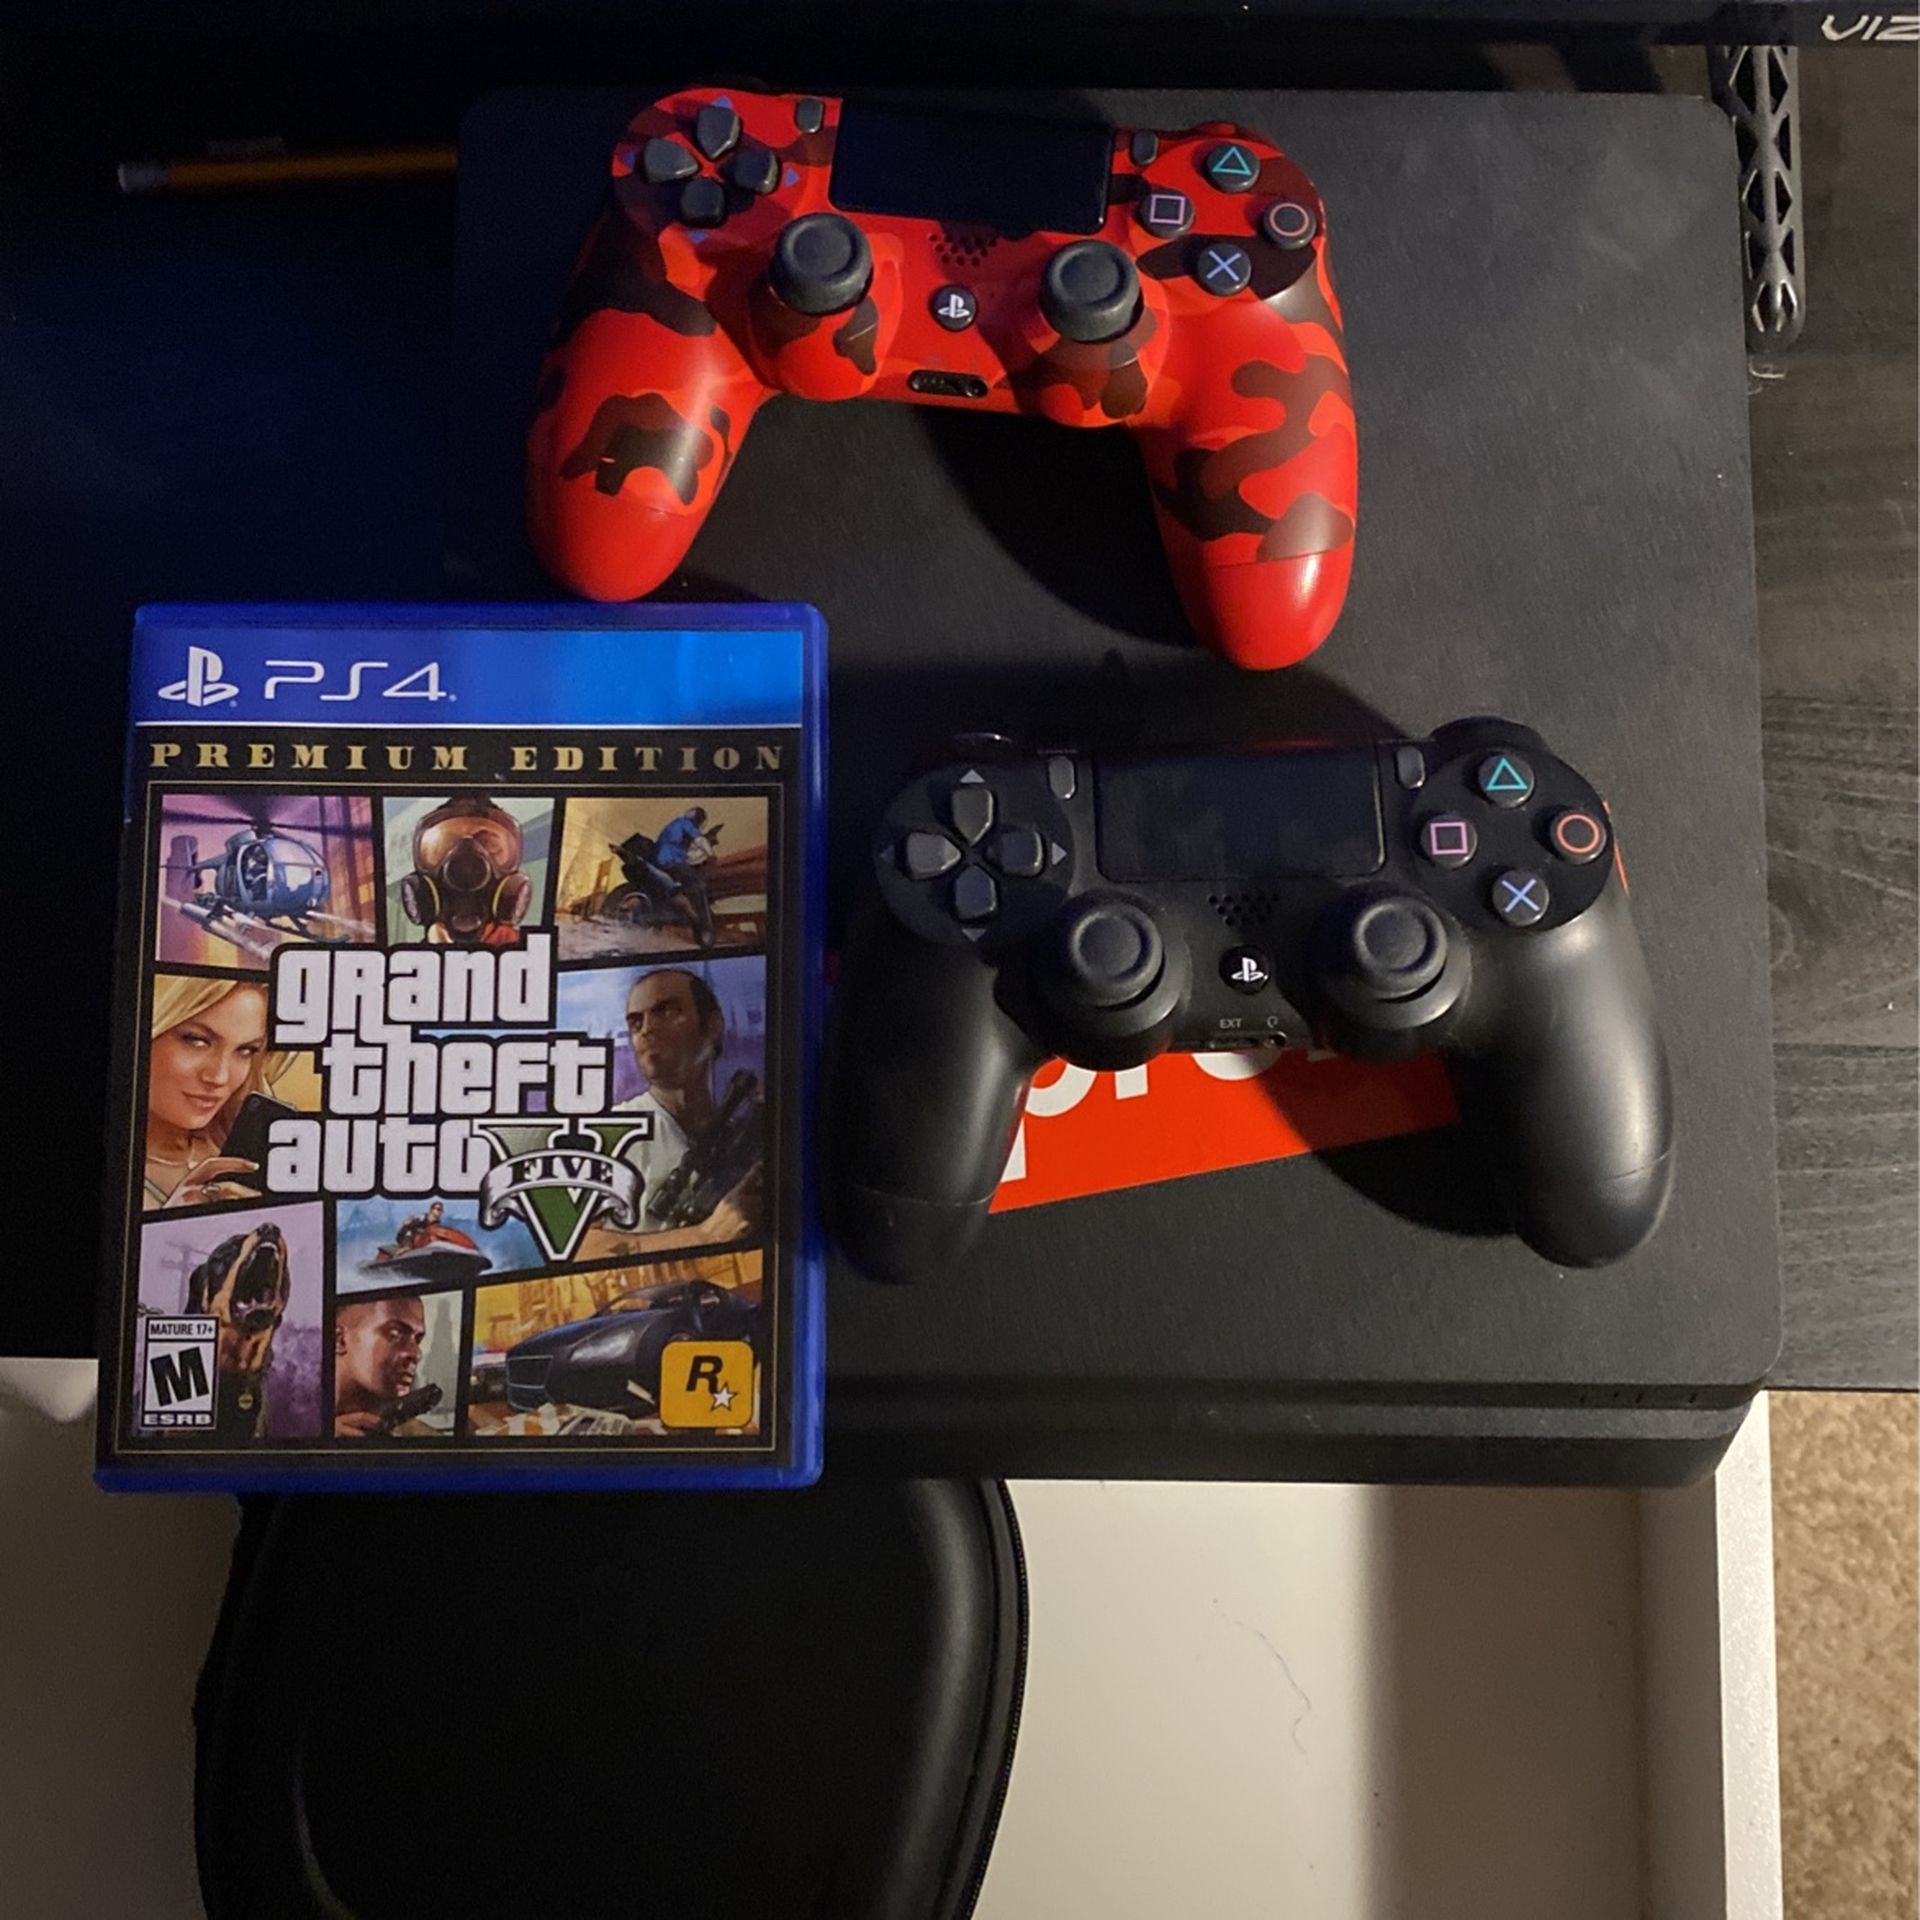 LOOKING FOR TRADE FOR PC Used PS4 With Cables, Headset, And GTA 5 Disk Version And 50 Cash